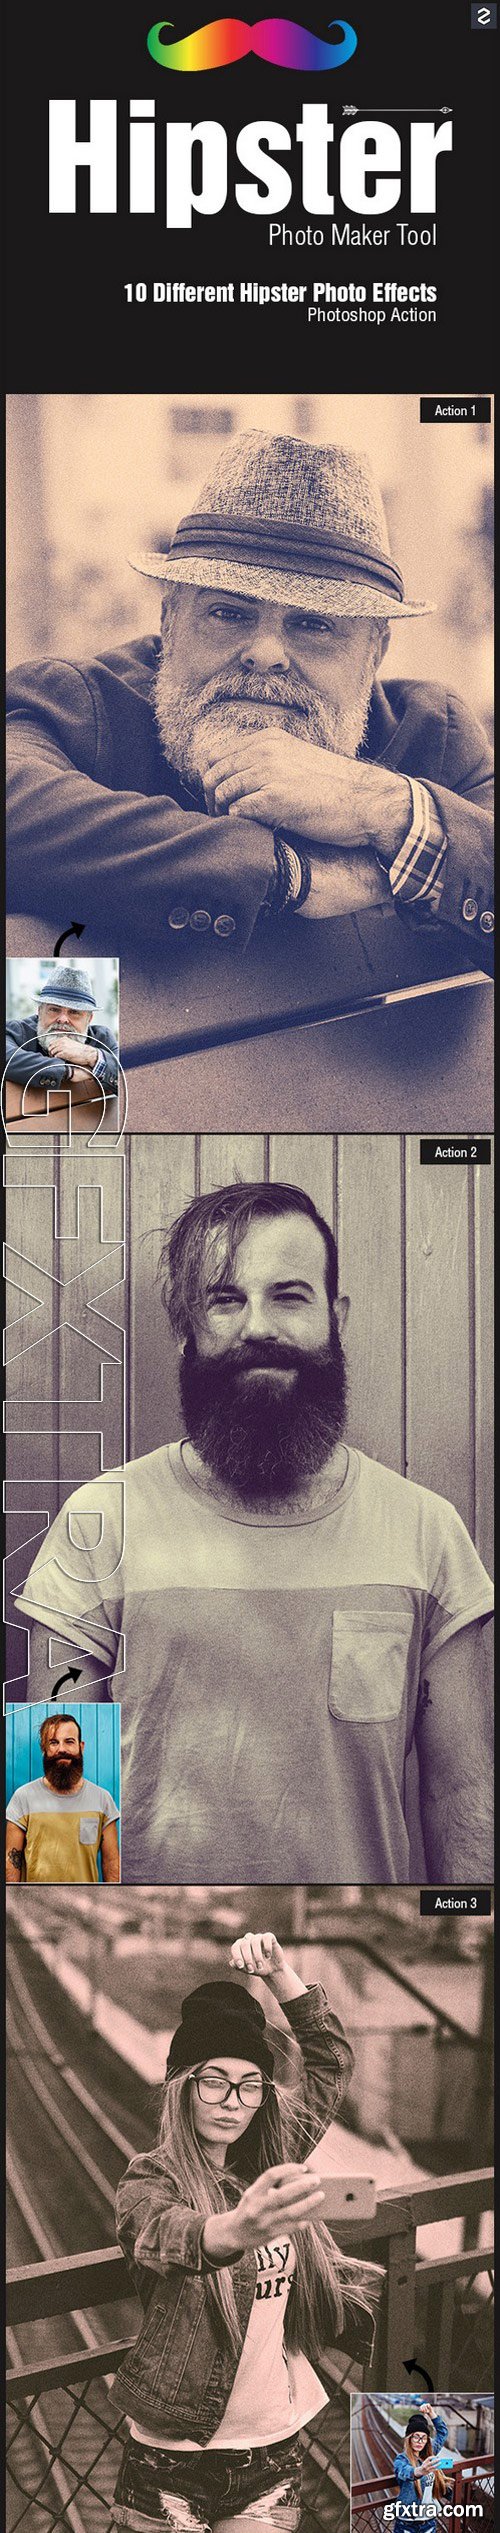 Graphicriver - Hipster Photo Maker Tool 11471210